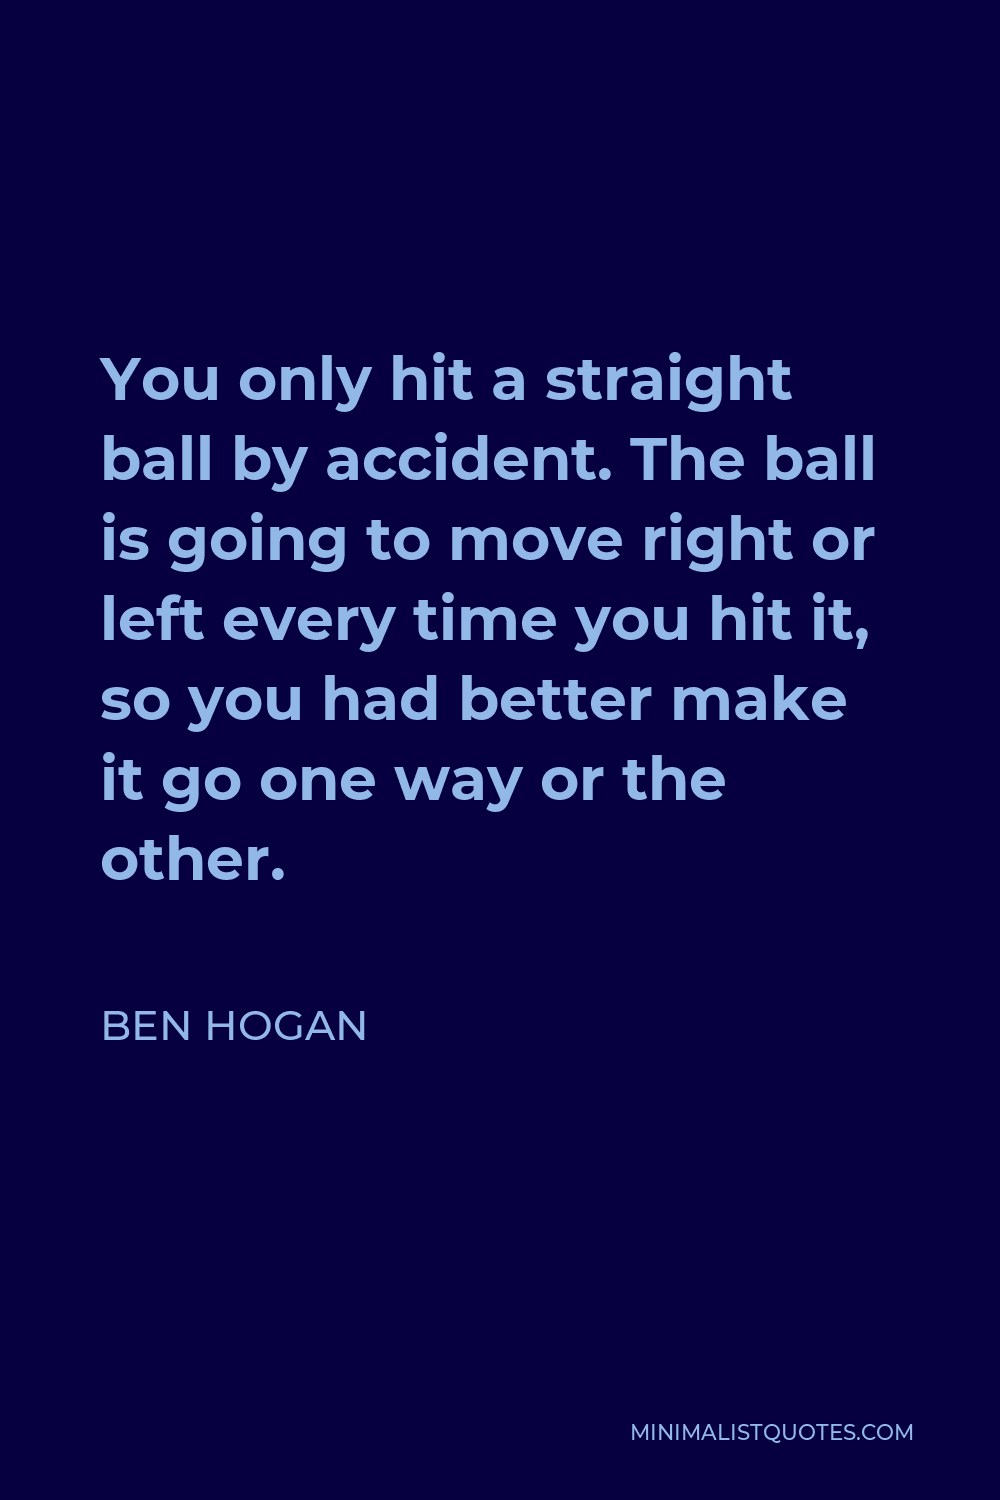 Ben Hogan Quote - You only hit a straight ball by accident. The ball is going to move right or left every time you hit it, so you had better make it go one way or the other.